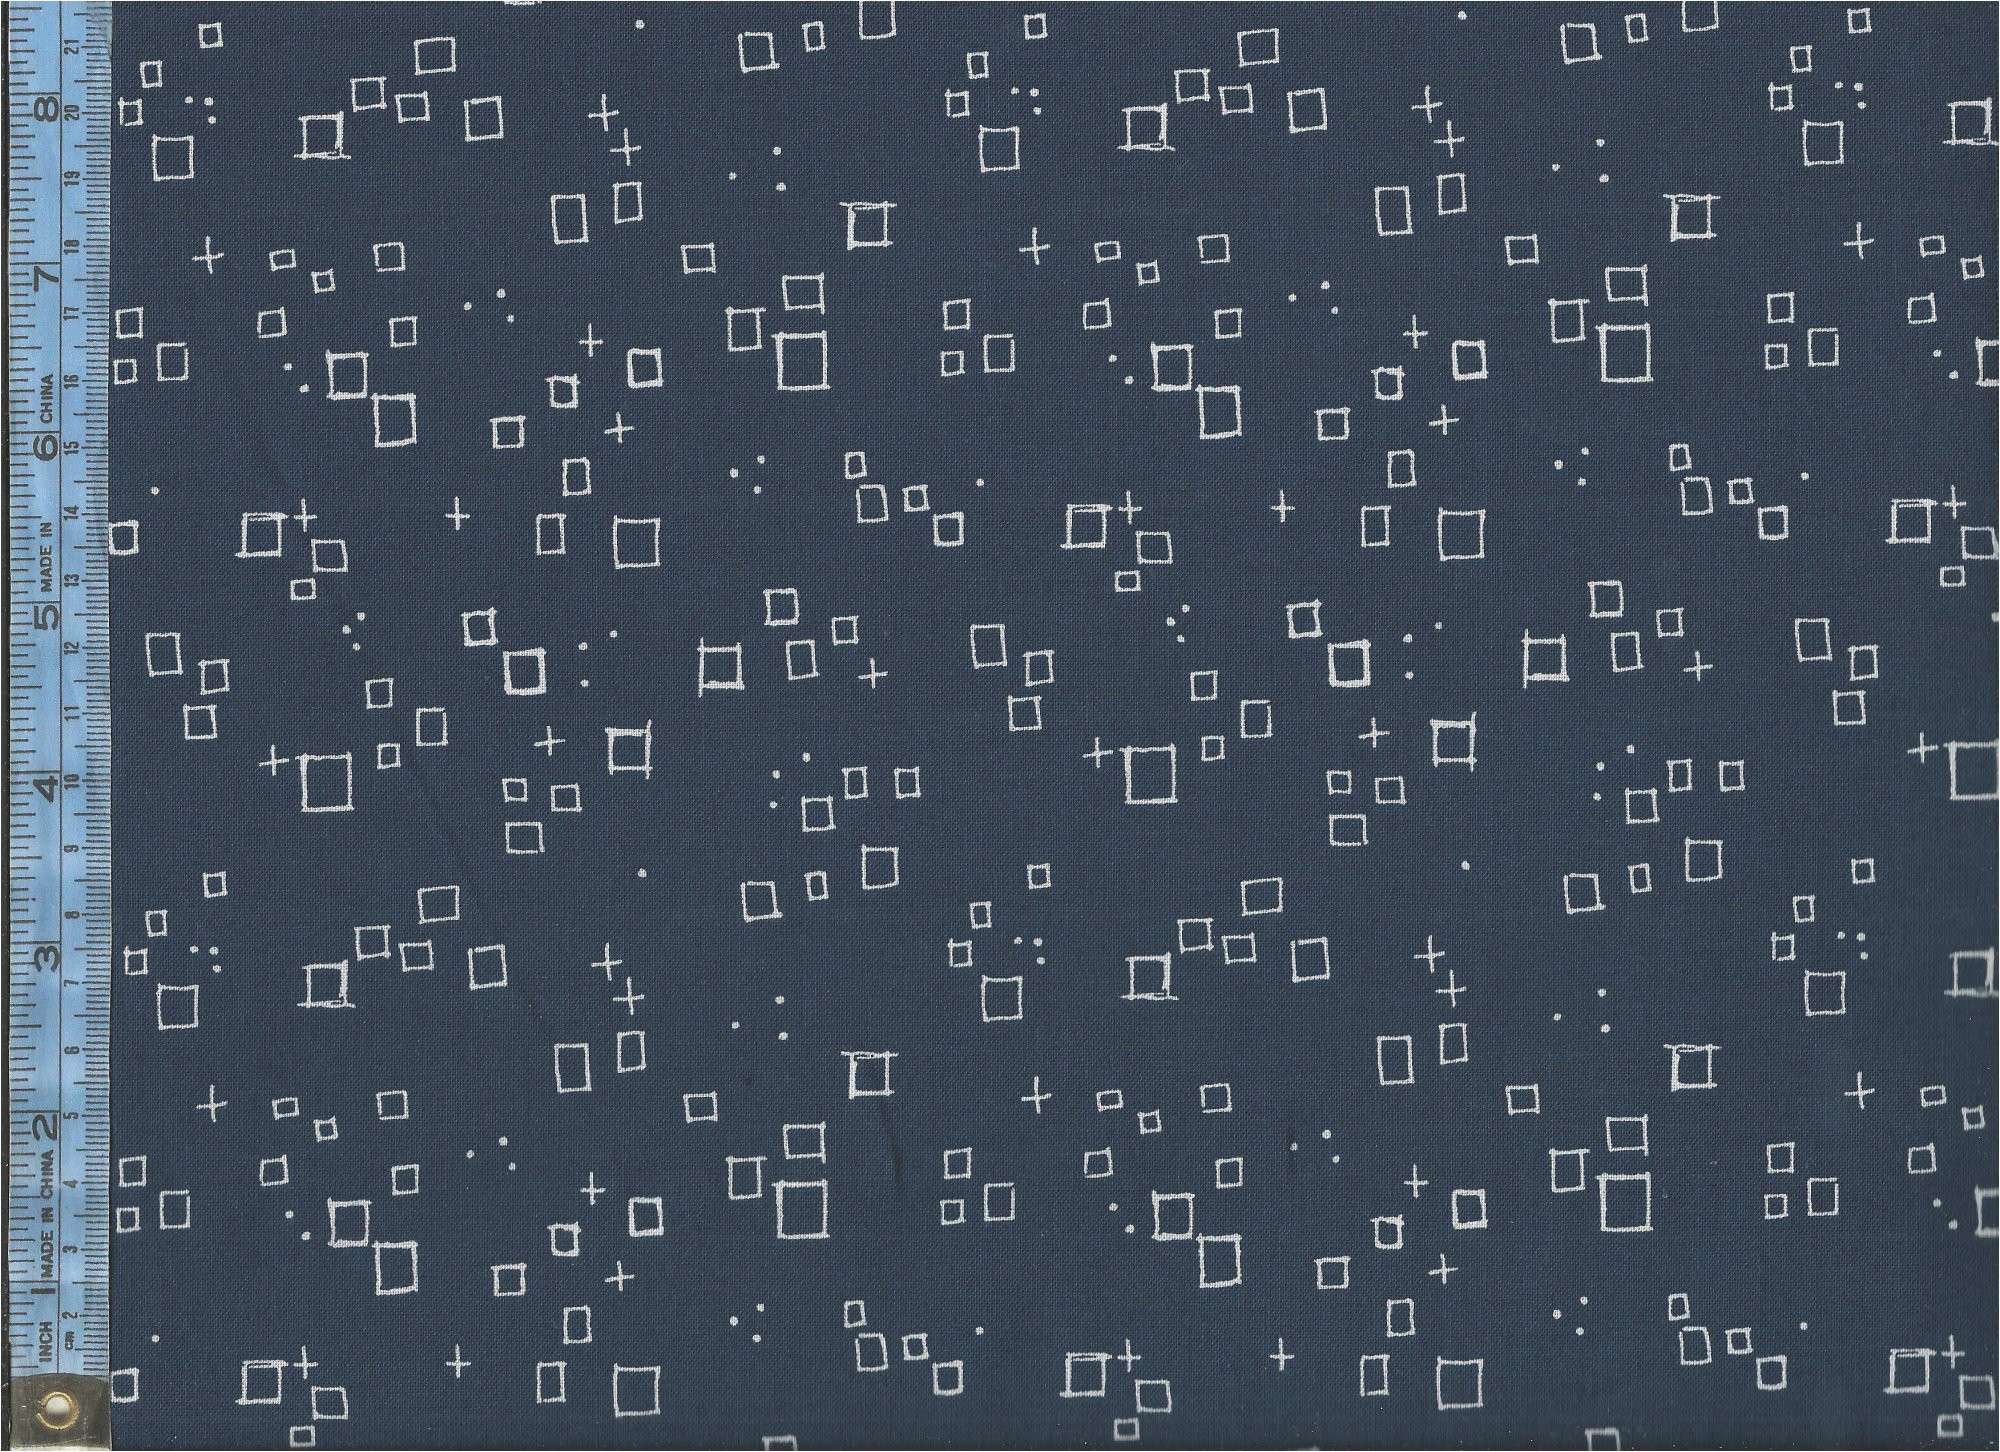 curious dream white squares and dotted plus signs on dark navy blue background